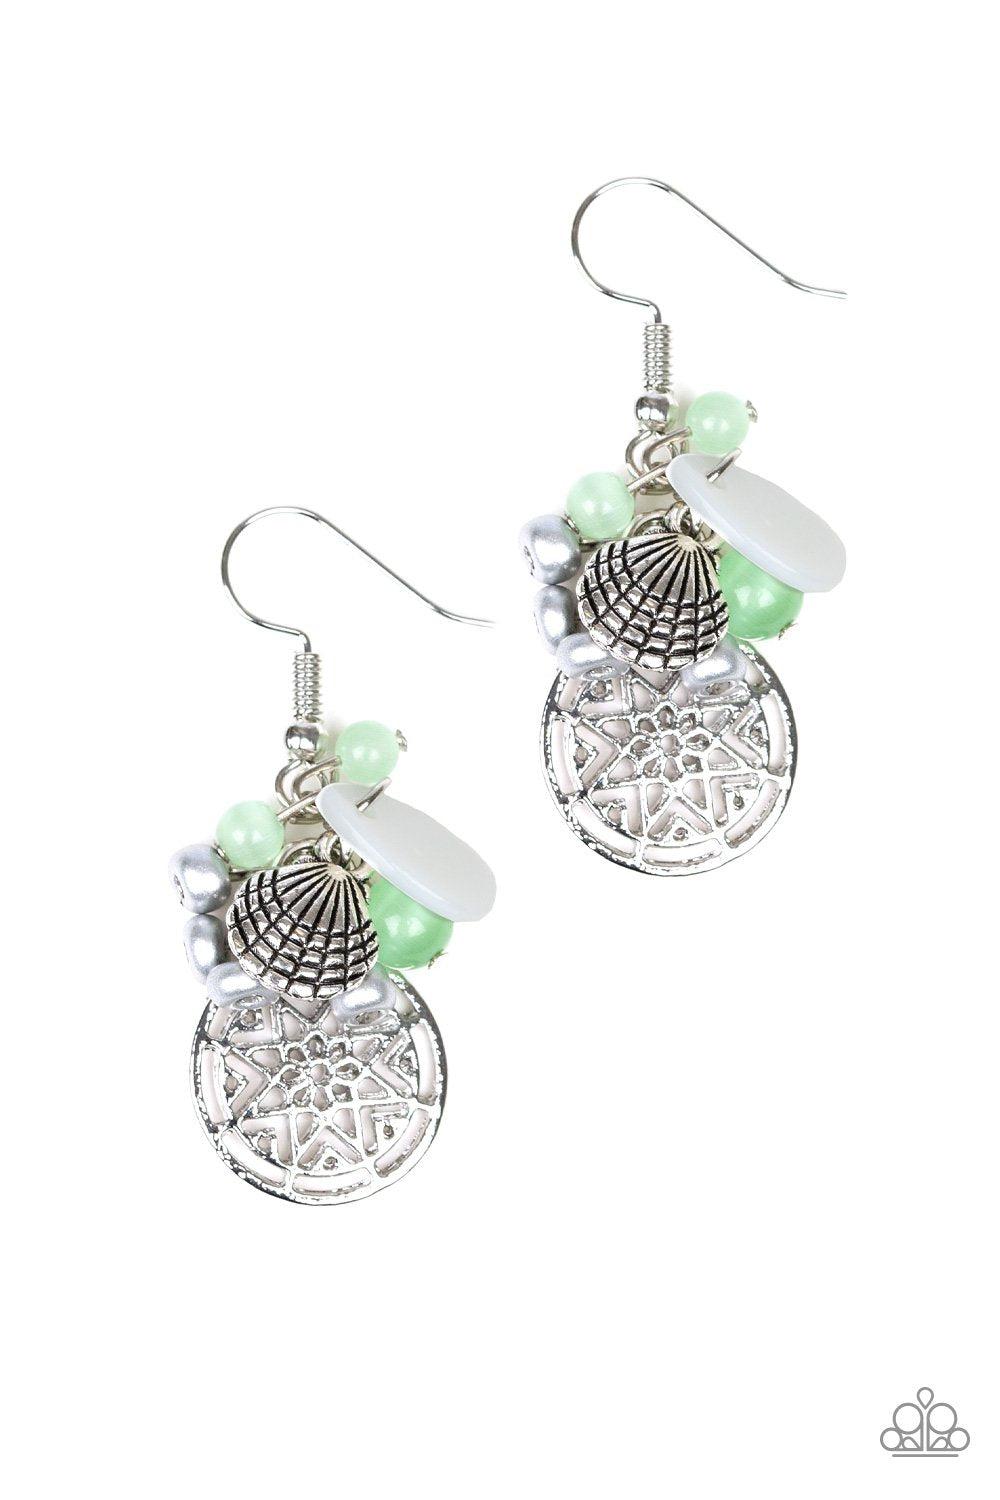 Ocean Oracle Silver and Green Charm Earrings - Paparazzi Accessories-CarasShop.com - $5 Jewelry by Cara Jewels